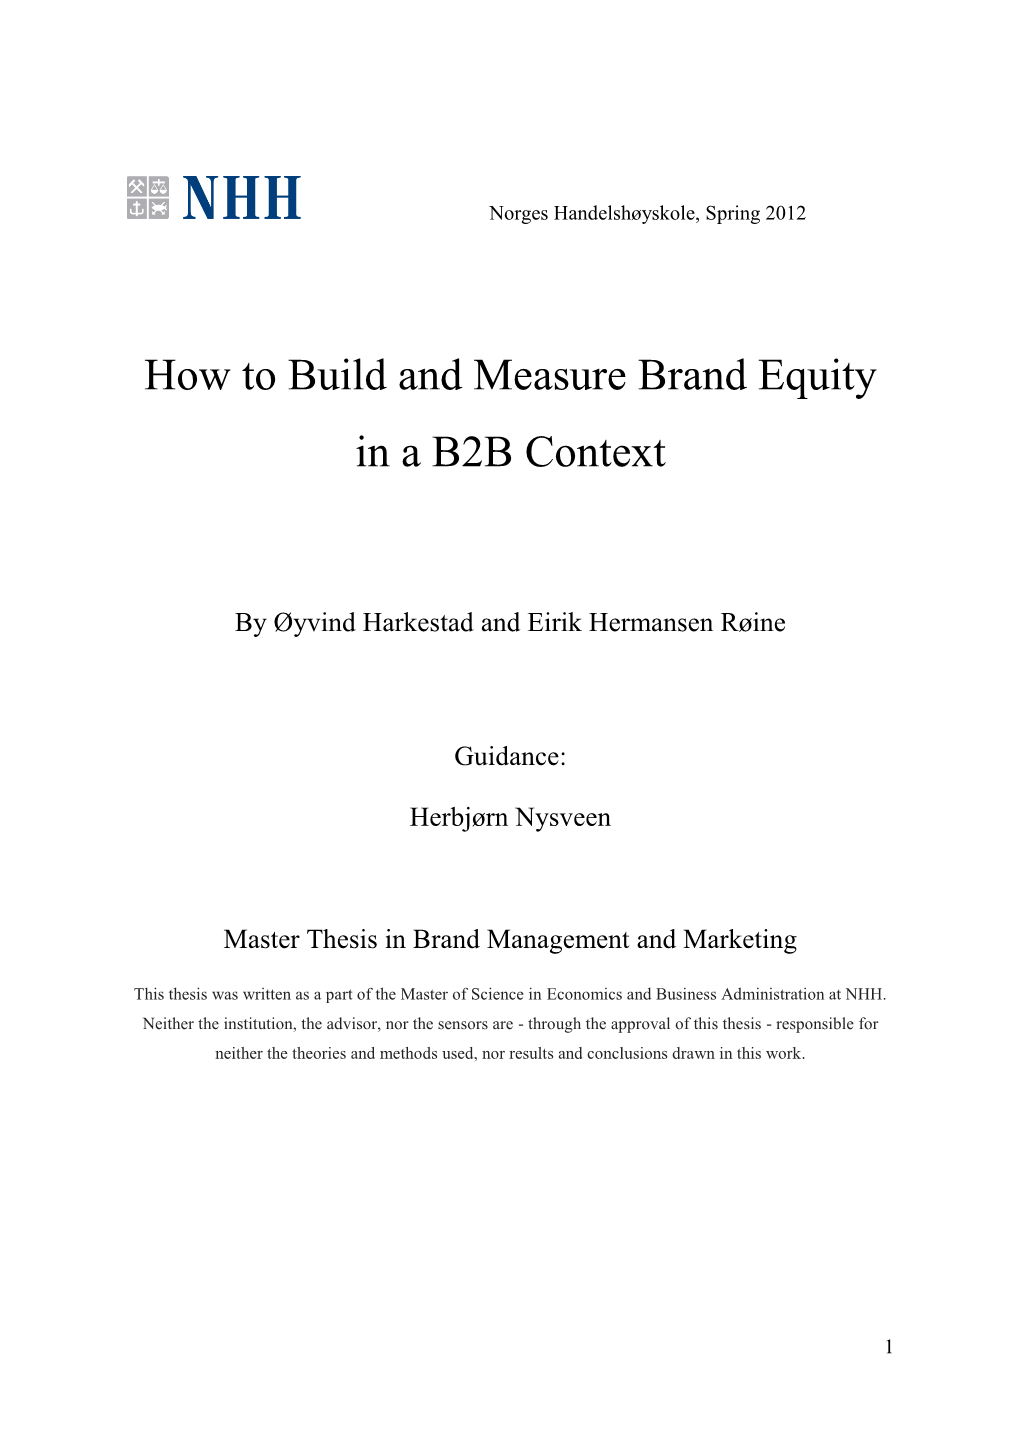 How to Build and Measure Brand Equity in a B2B Context